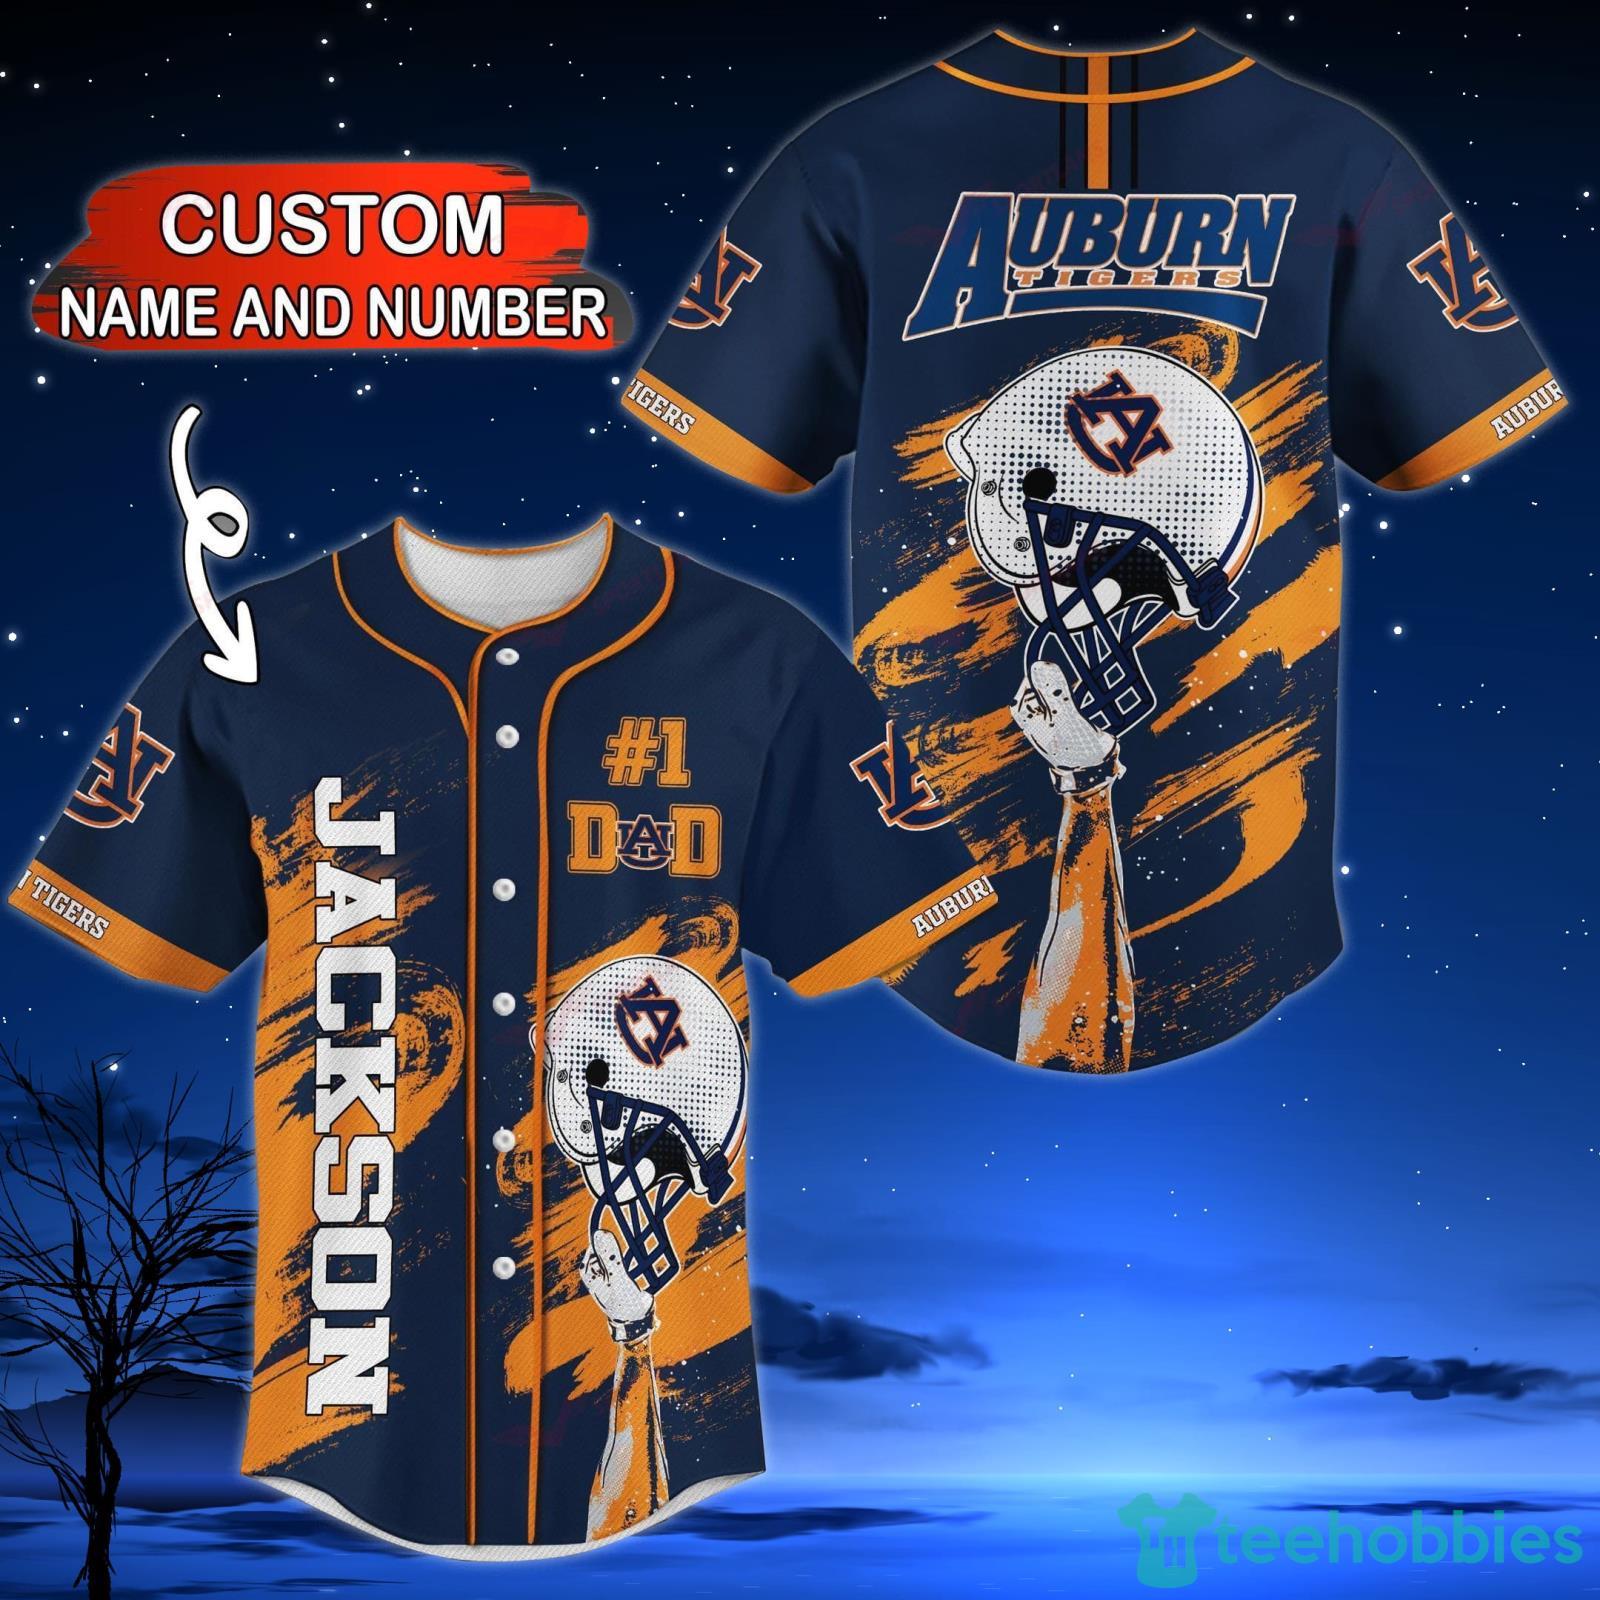 Tigers unveil their special event jerseys - Bless You Boys